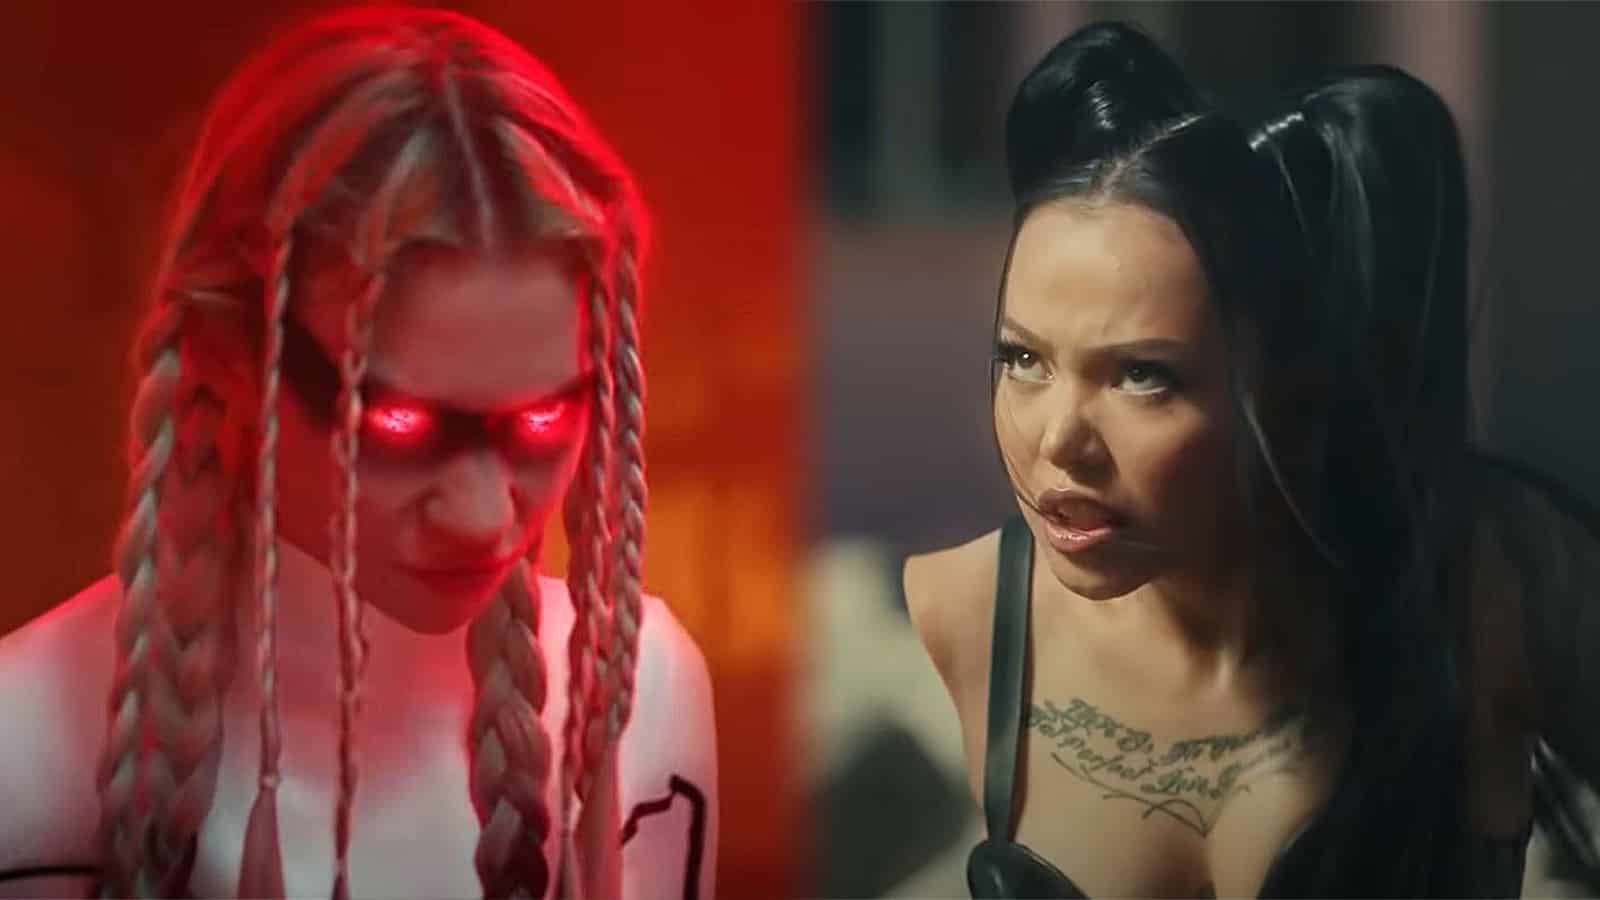 Bella Poarch says Dolls fight scene with Grimes was scary to film